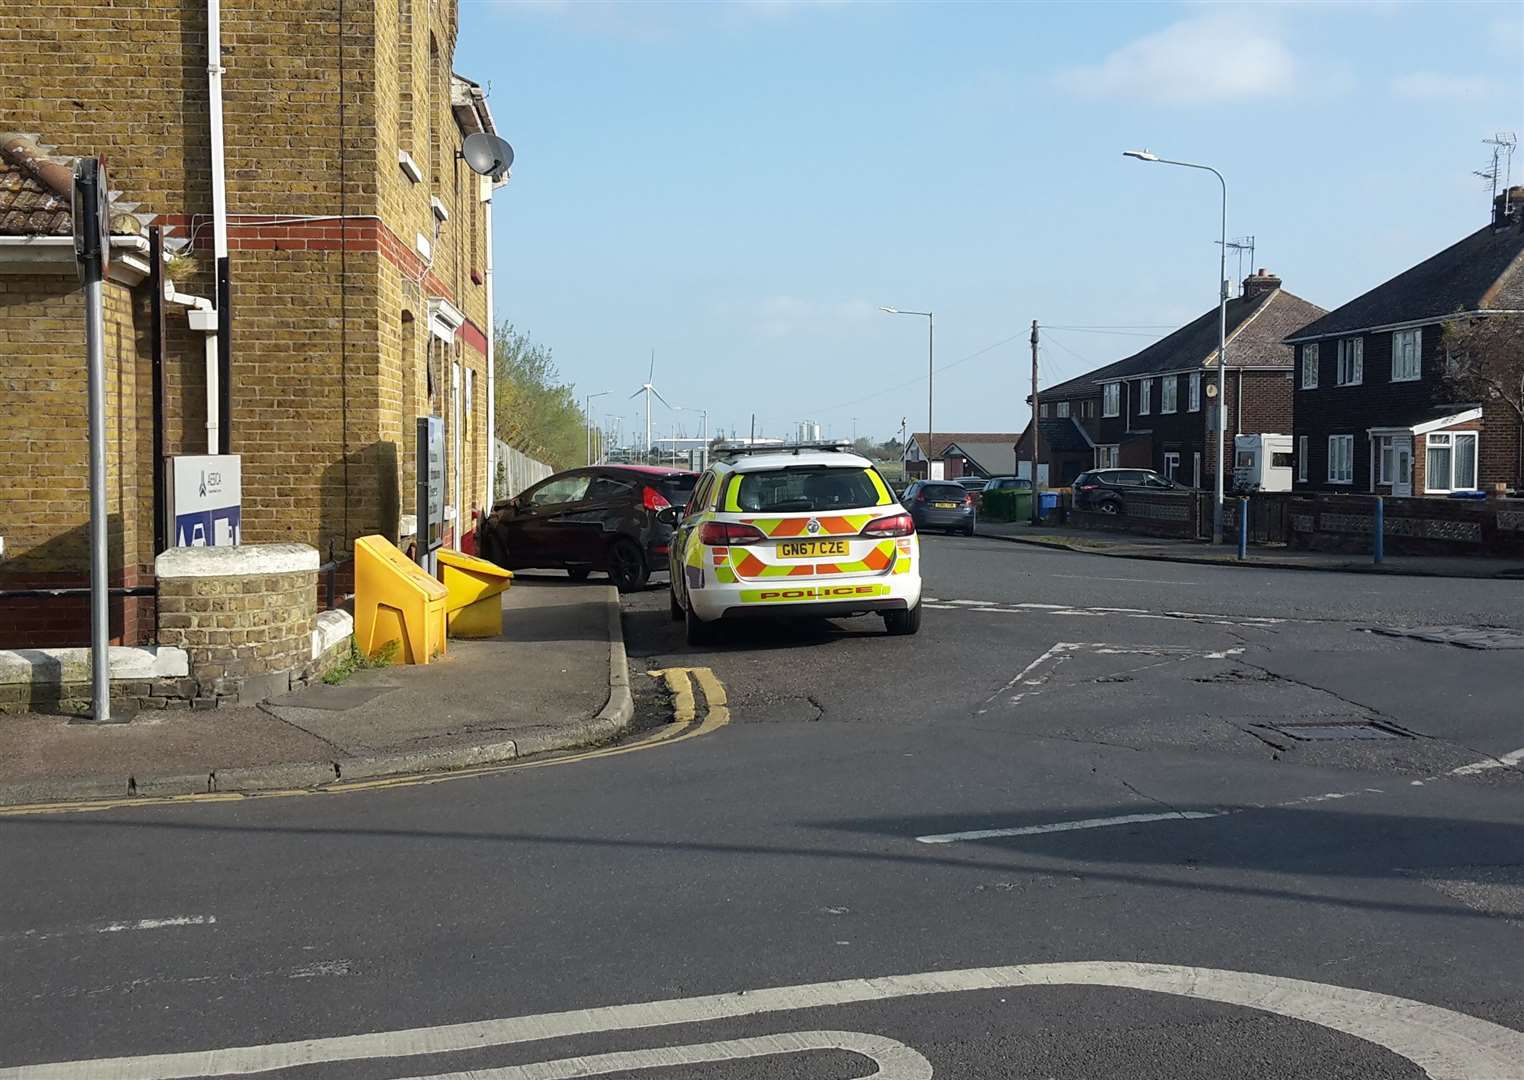 A car has crashed into a house in Queenborough (8411046)